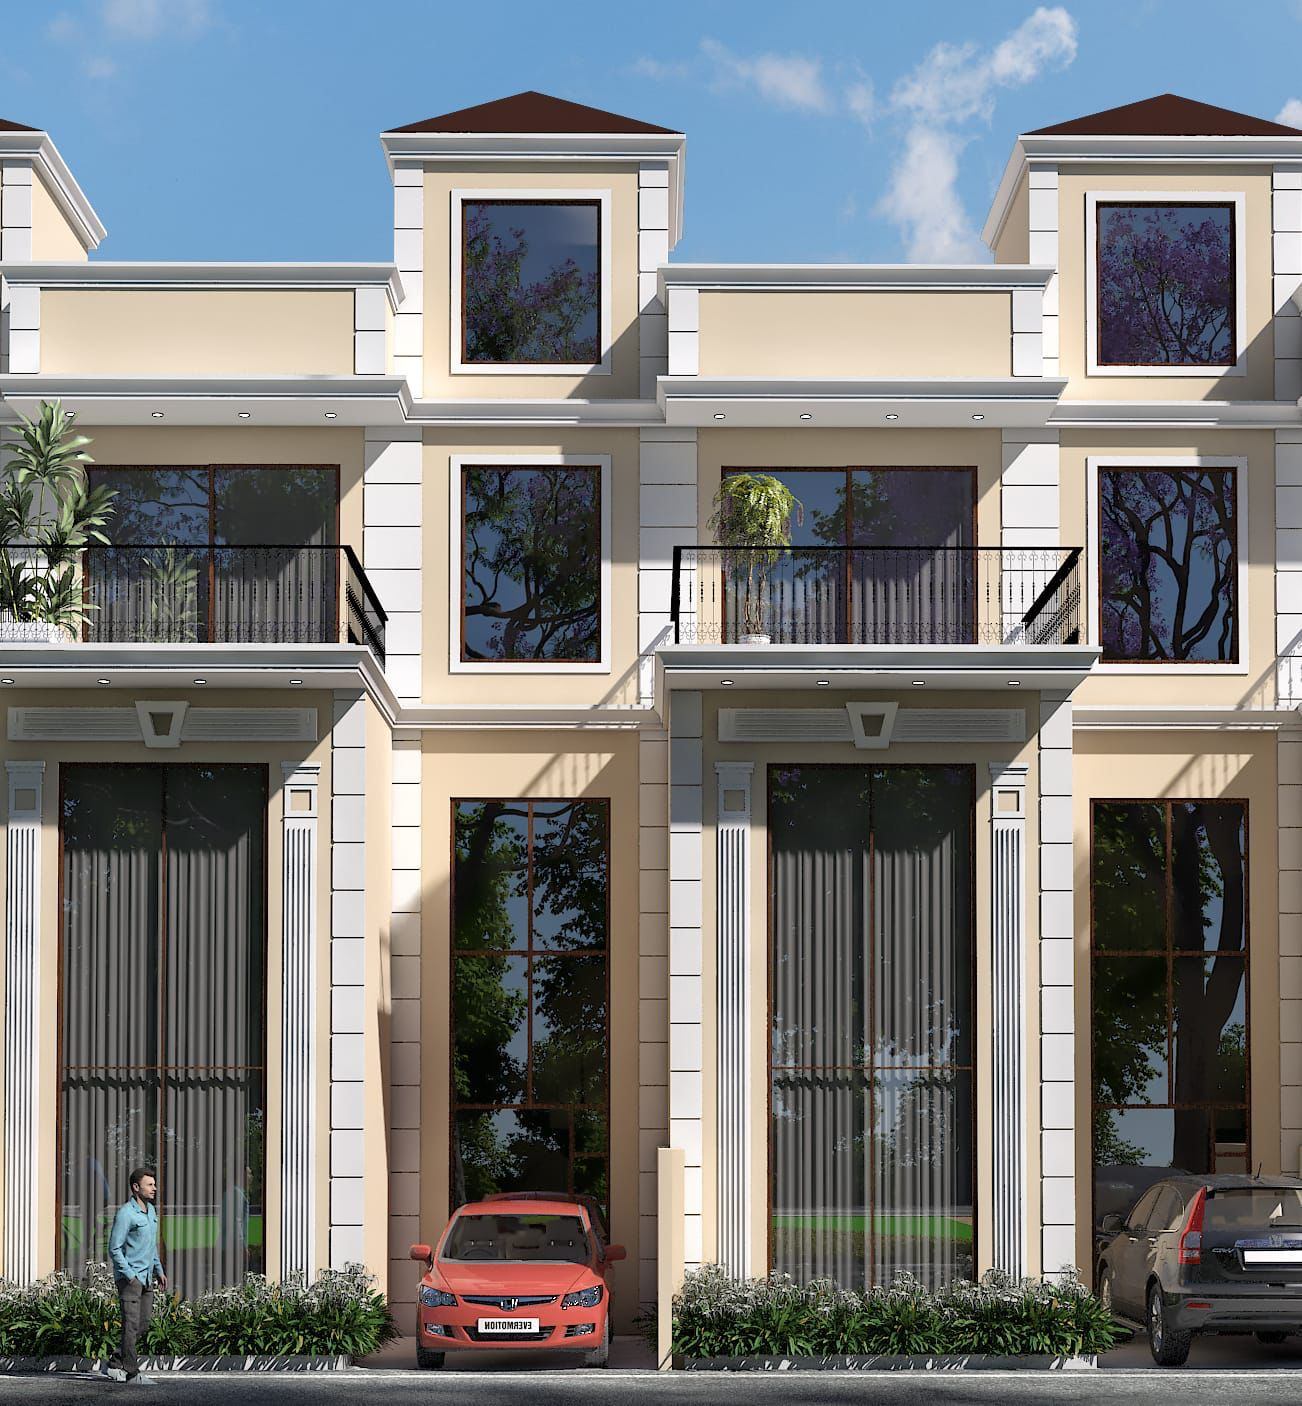 4 Bed/ 4 Bath Sell Apartment/ Flat; 1,000 sq. ft. carpet area; Under Construction for sale